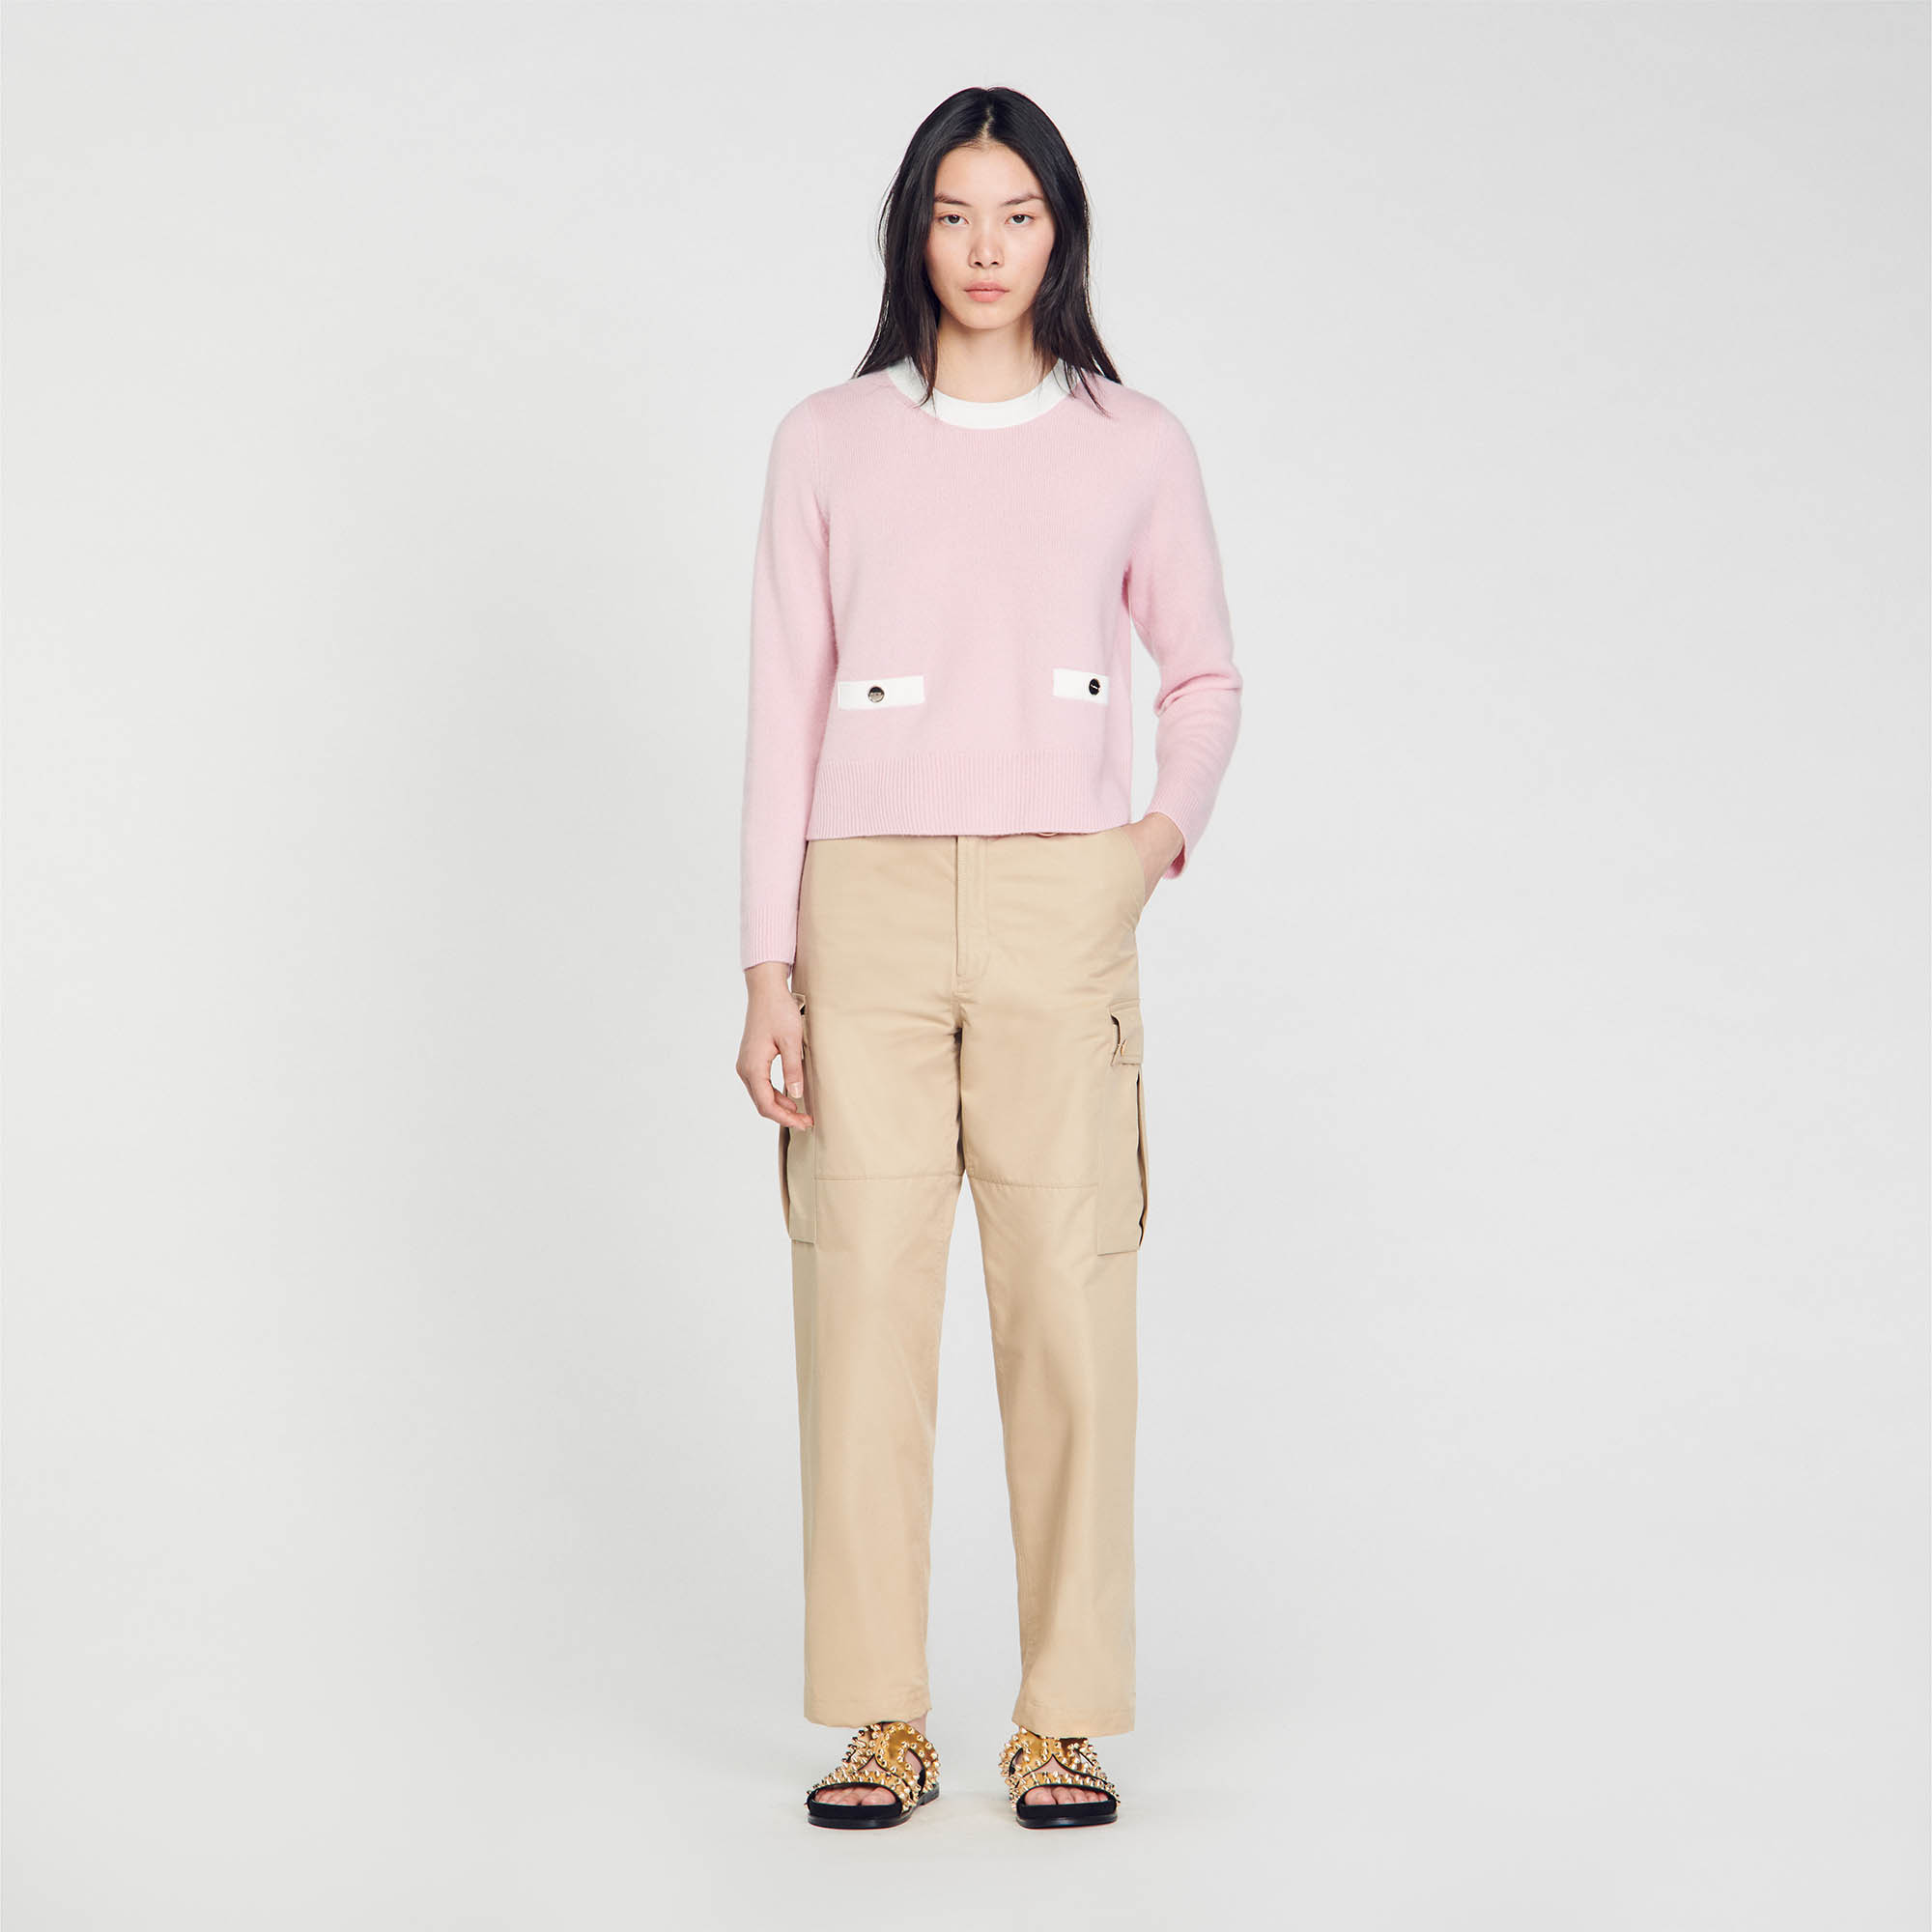 Sandro wool Fine knit sweater with a round neckline, contrasting pockets, and a contrasting button placket on the back